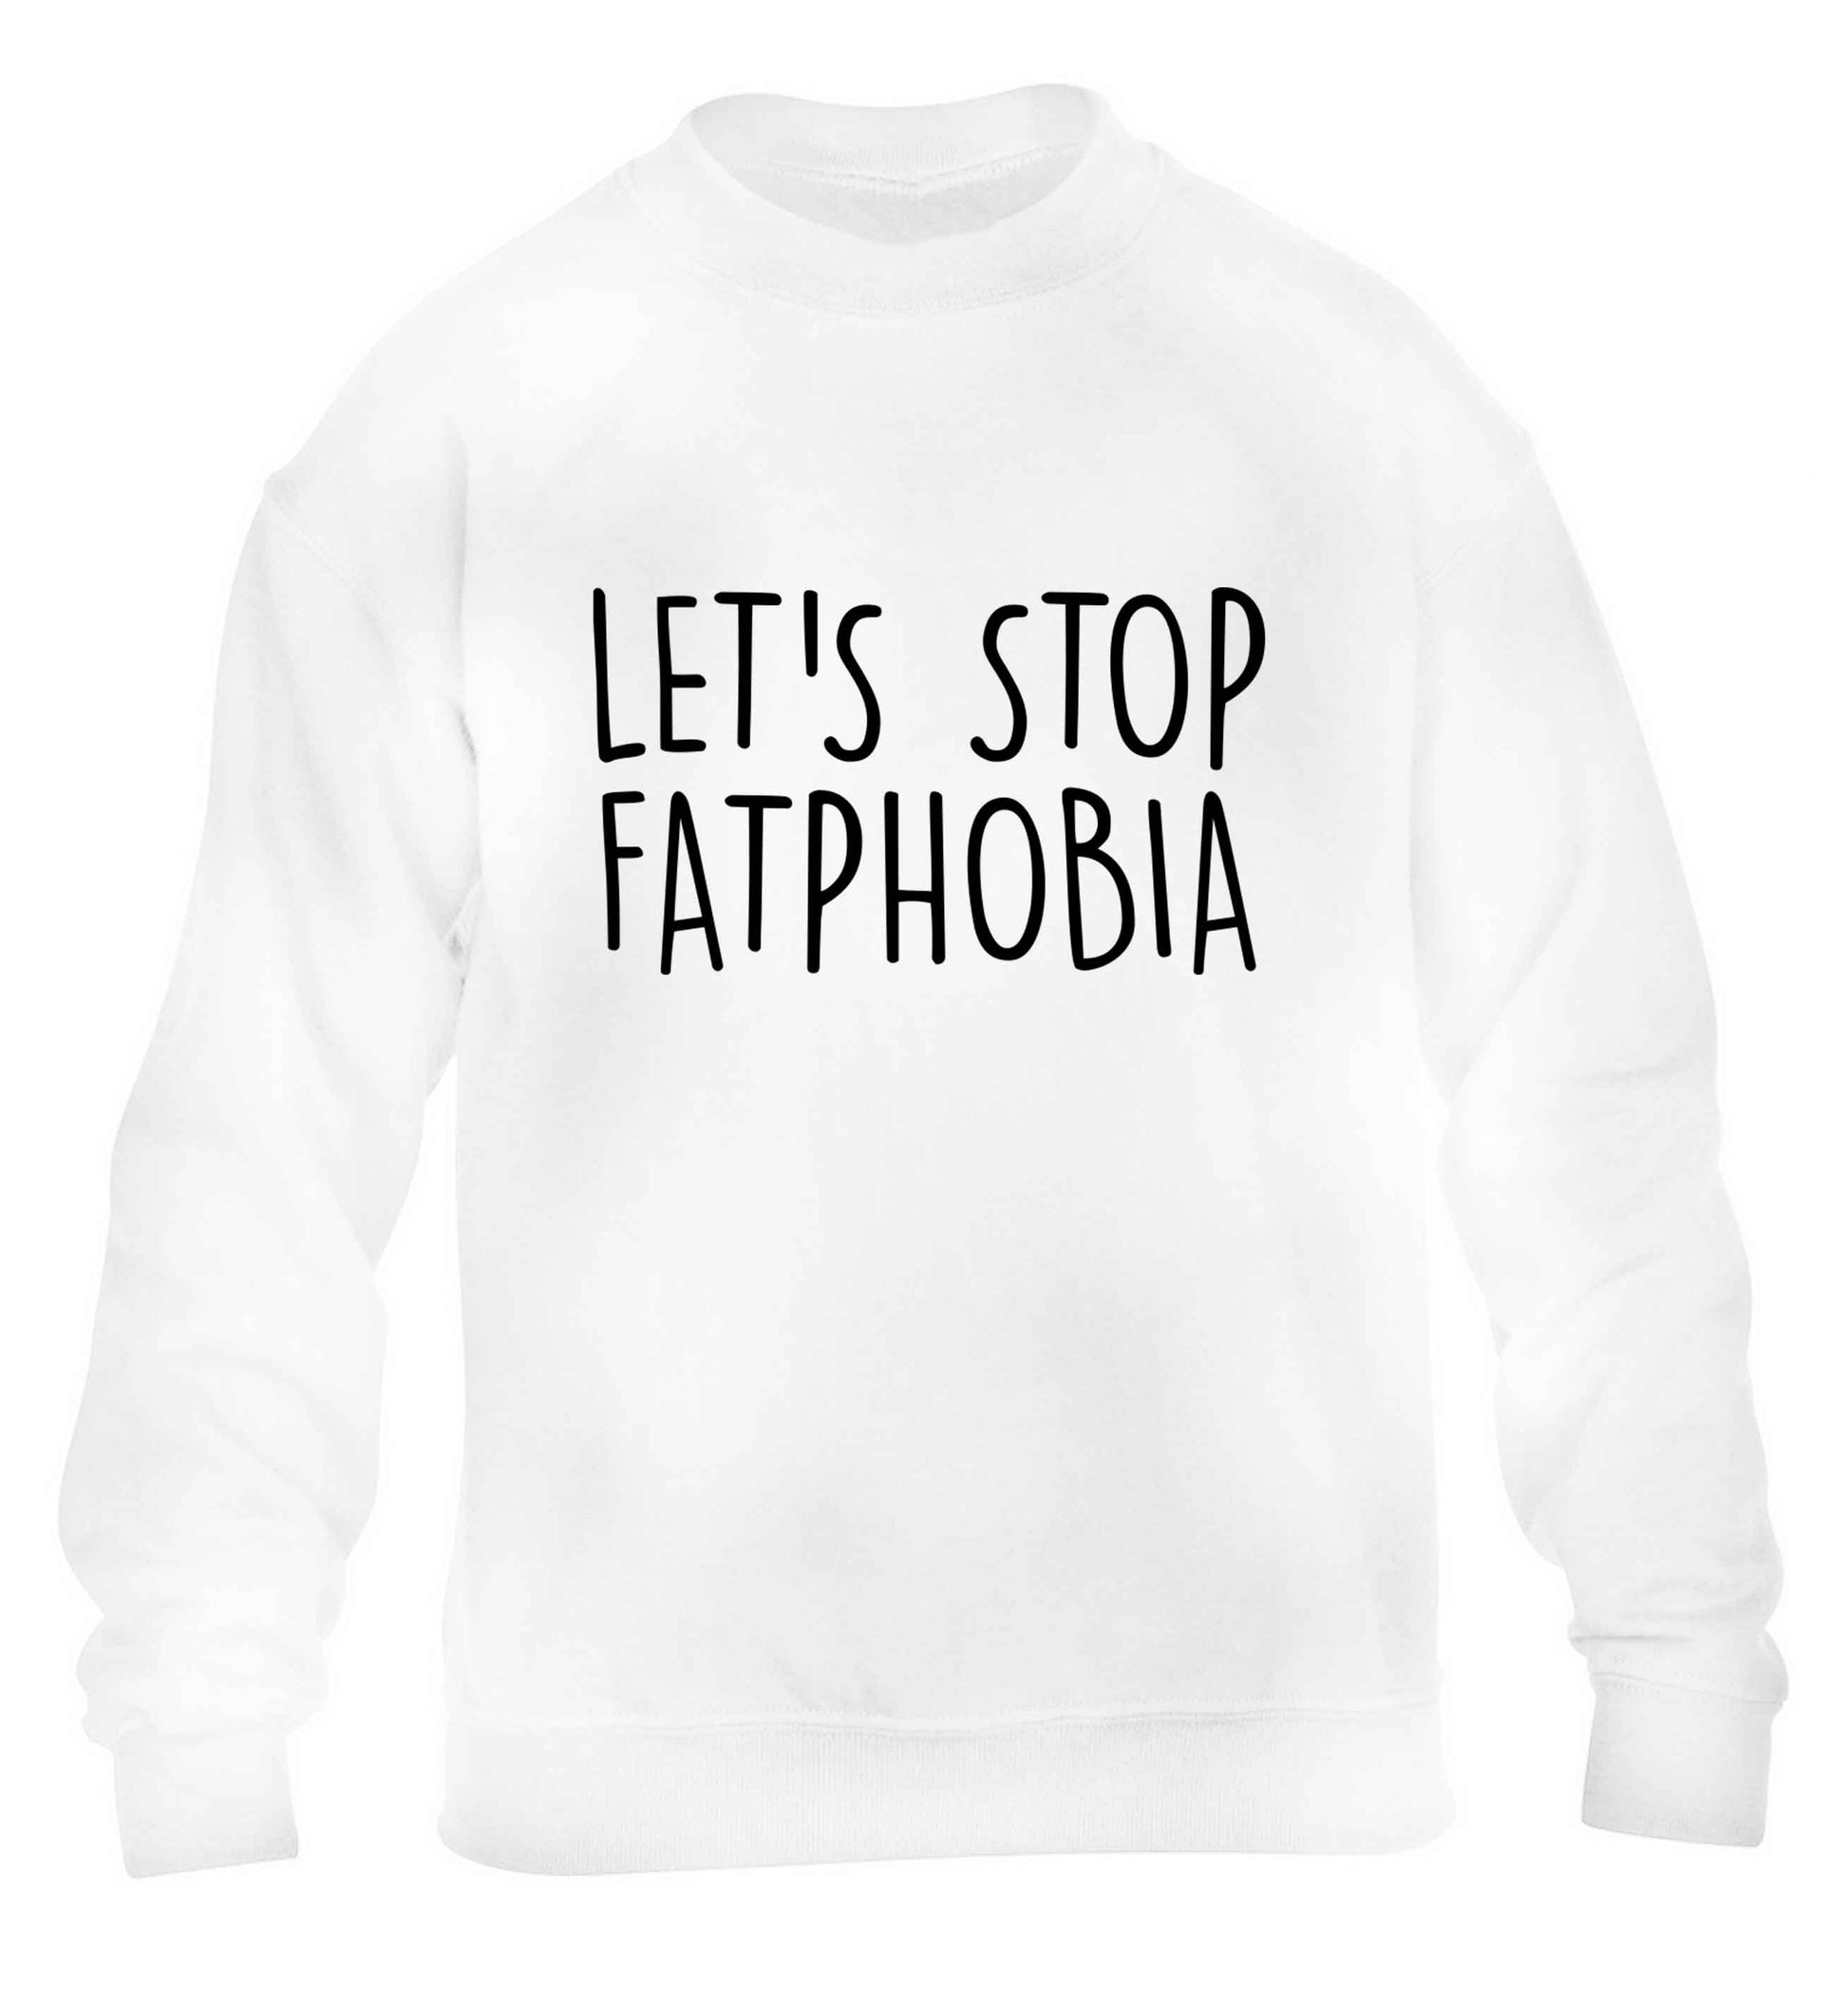 Let's stop fatphobia children's white sweater 12-13 Years